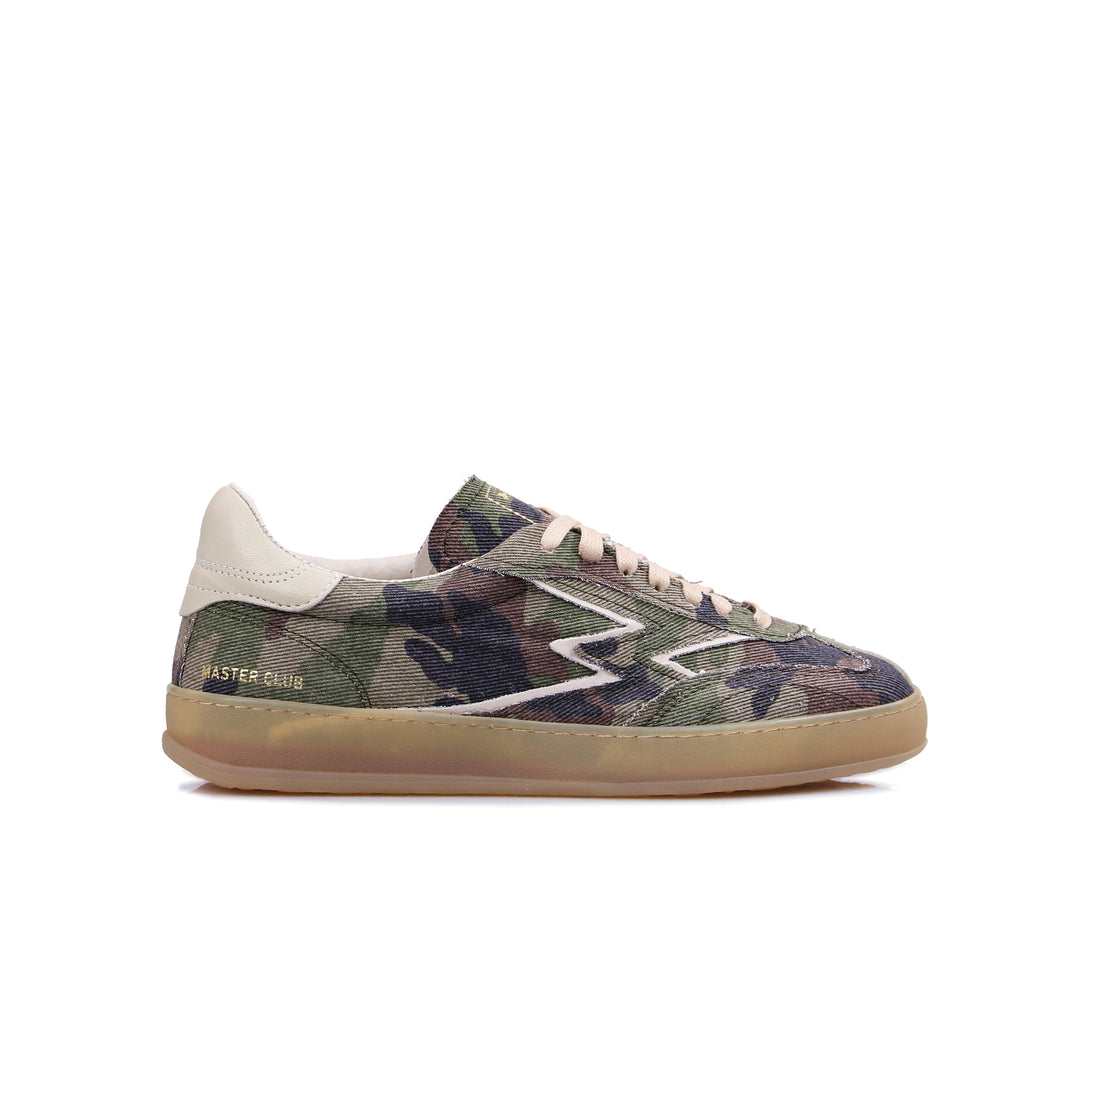 Sneaker Club Camouflage